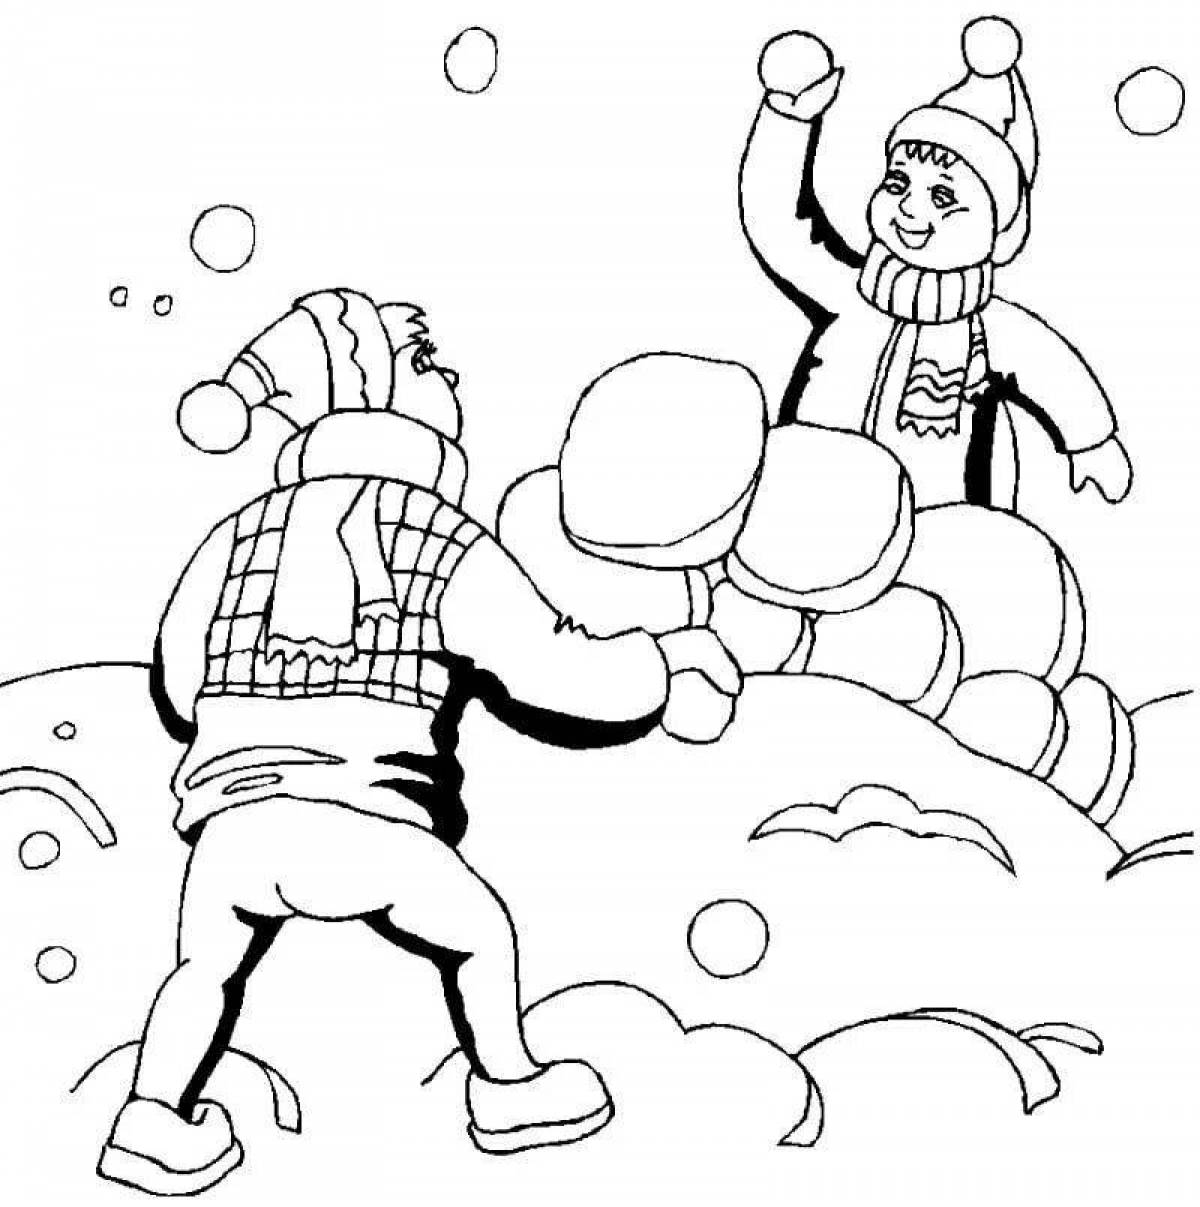 Snowball coloring page with splashes of color